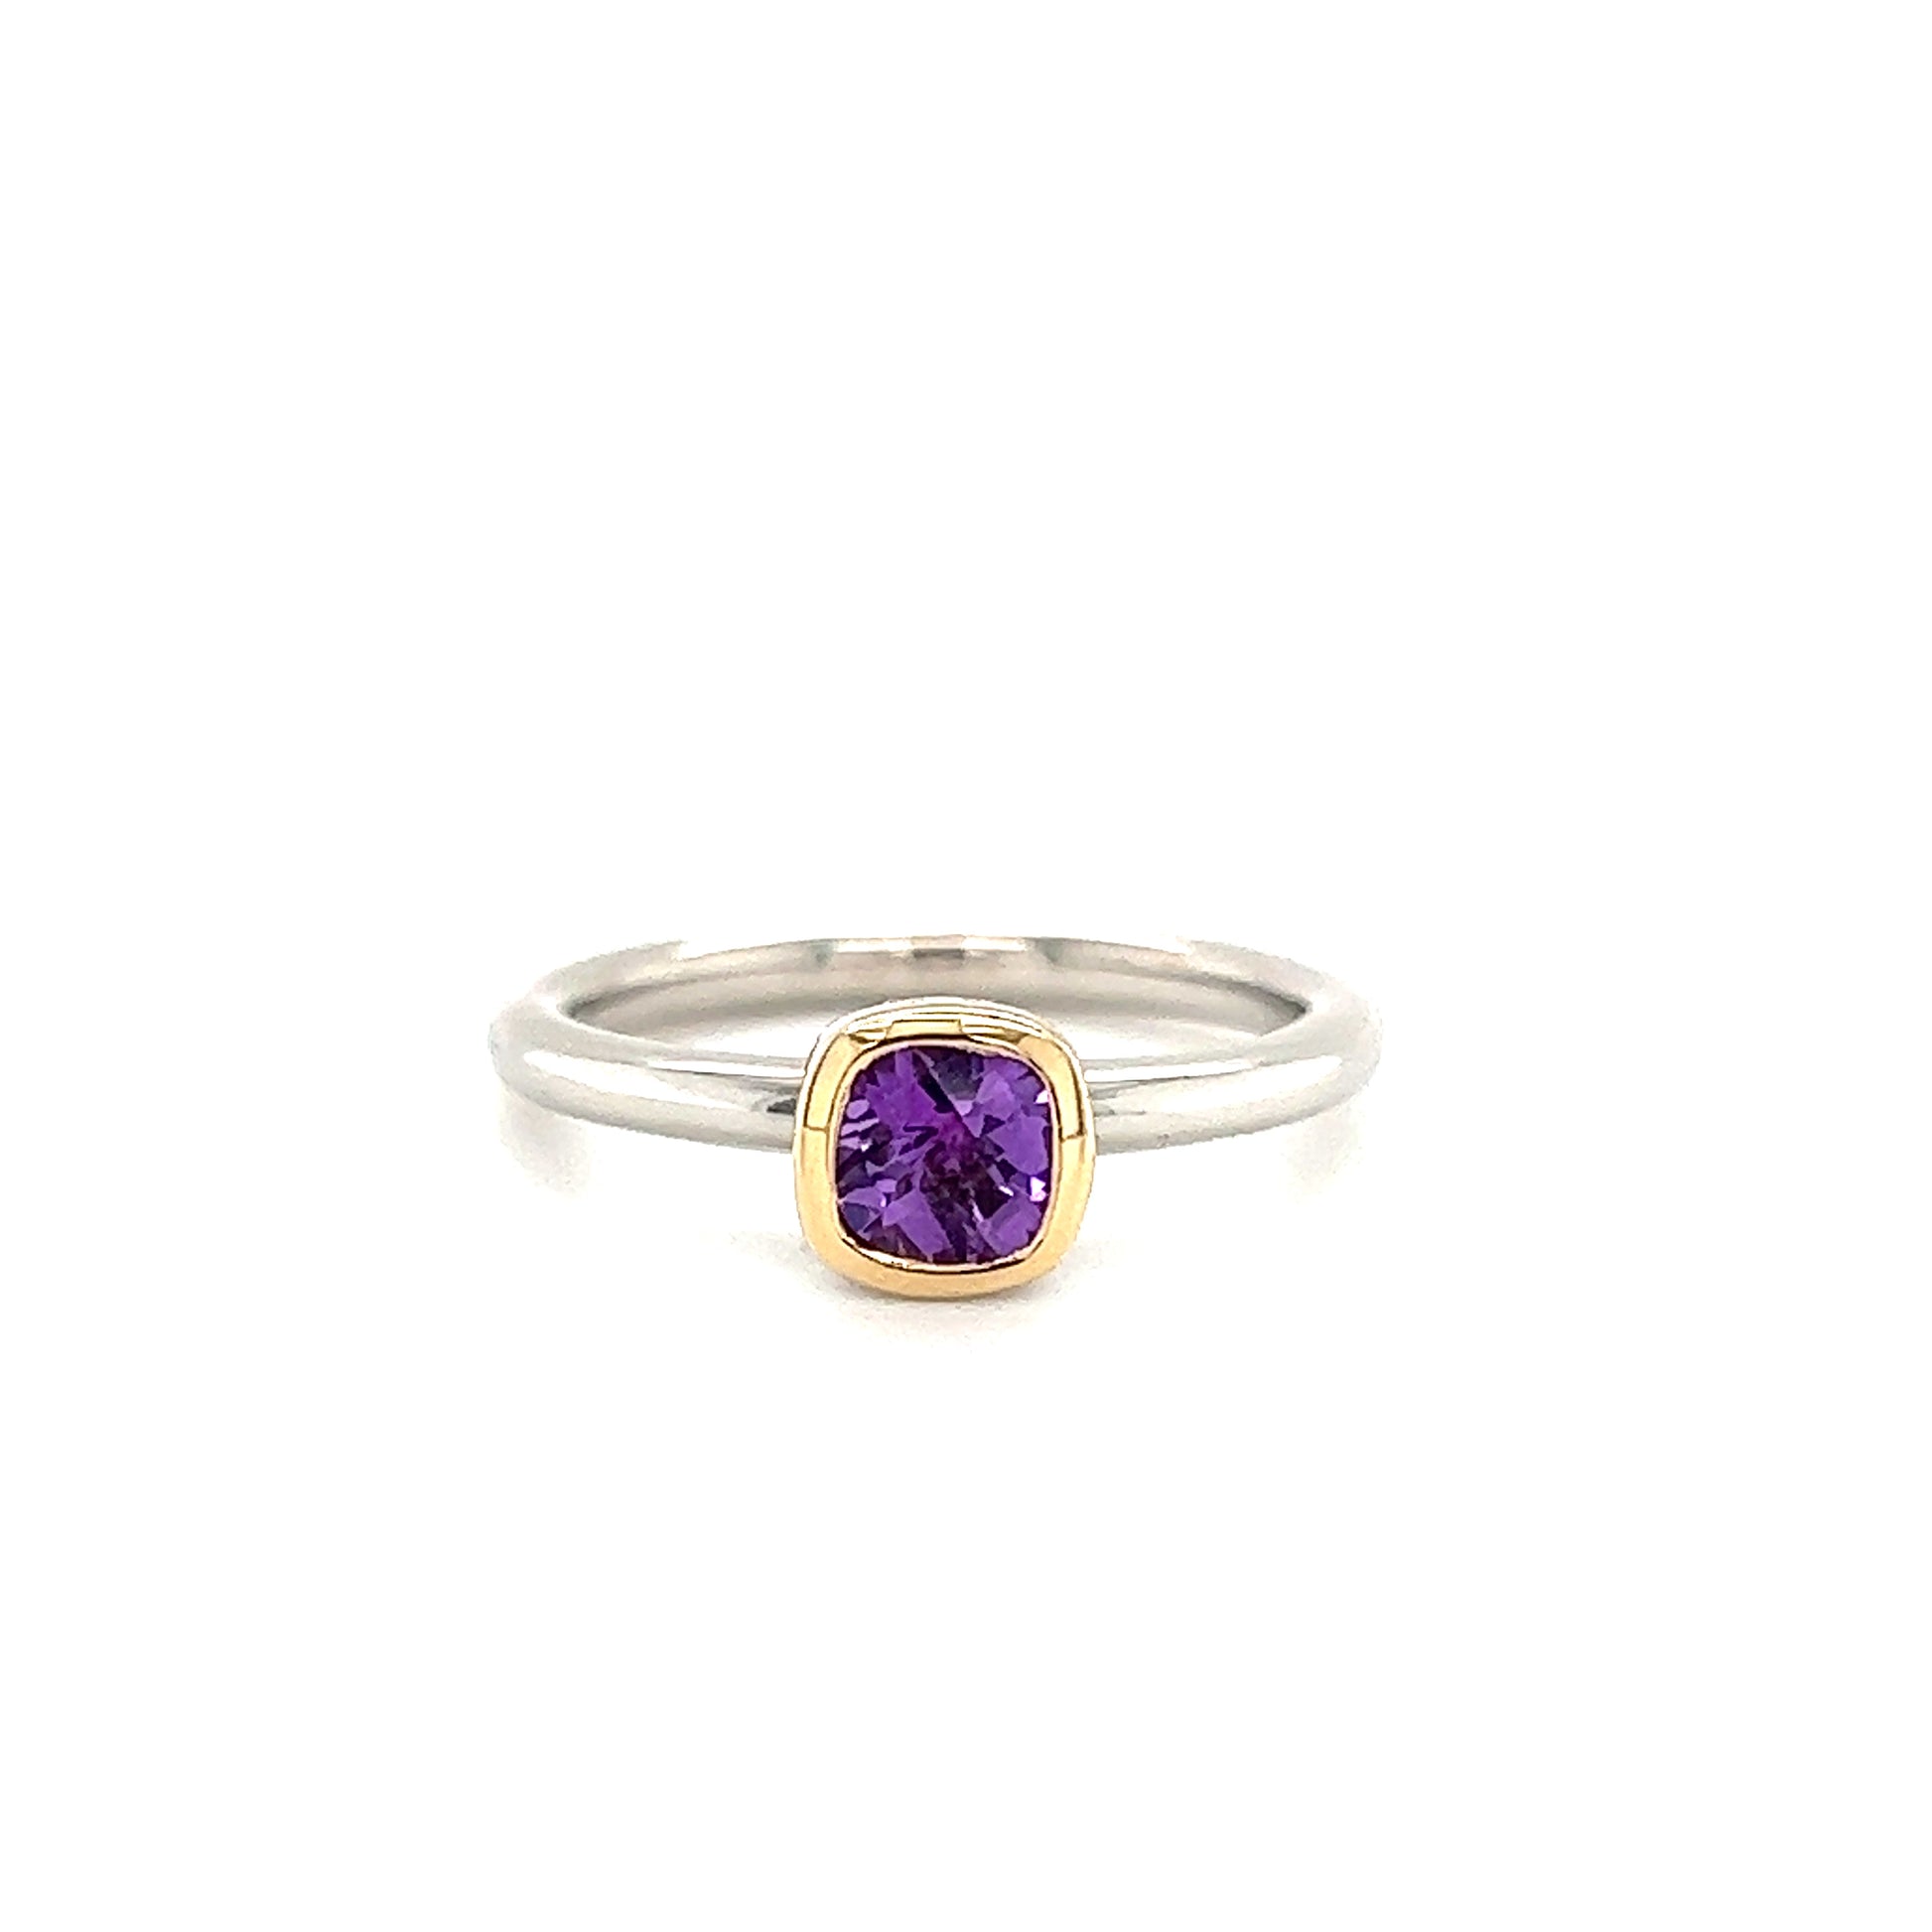 Cushion Amethyst Ring in Sterling Silver with 14K Yellow Gold Accent Front